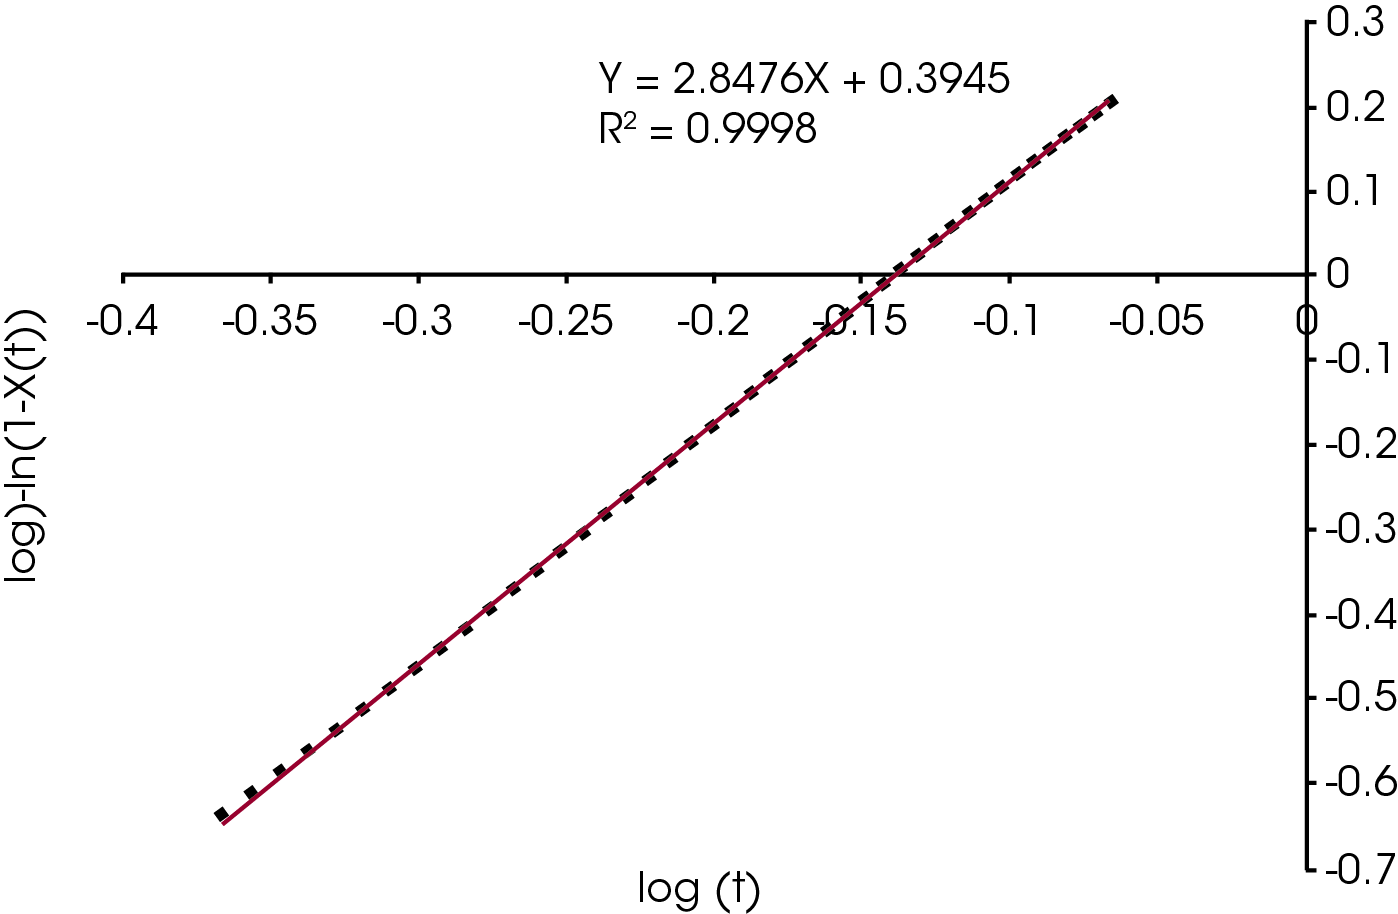 Figure 1 - Example of Avrami Analysis Using Linear Form from X(t) = 0.2 to X(t) = 0.8